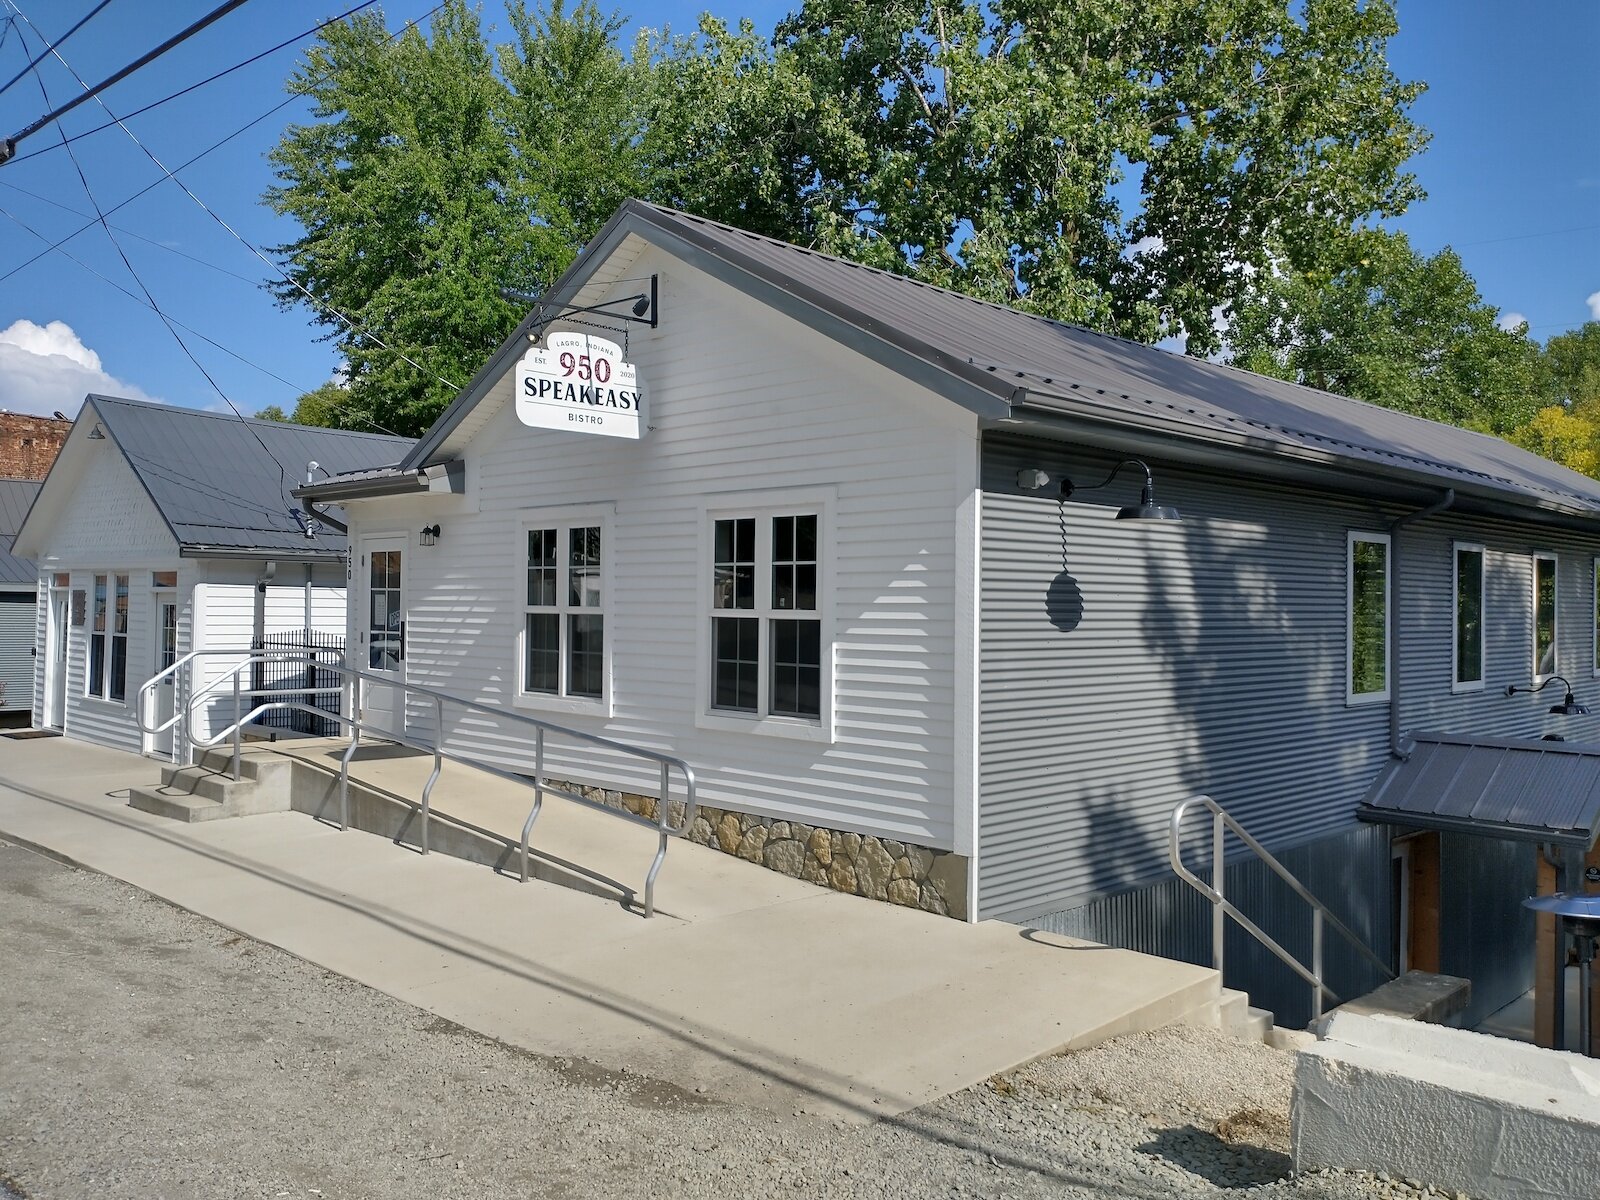 The 950 Speakeasy Bistro, a family-friendly eatery along the trail in Wabash County.